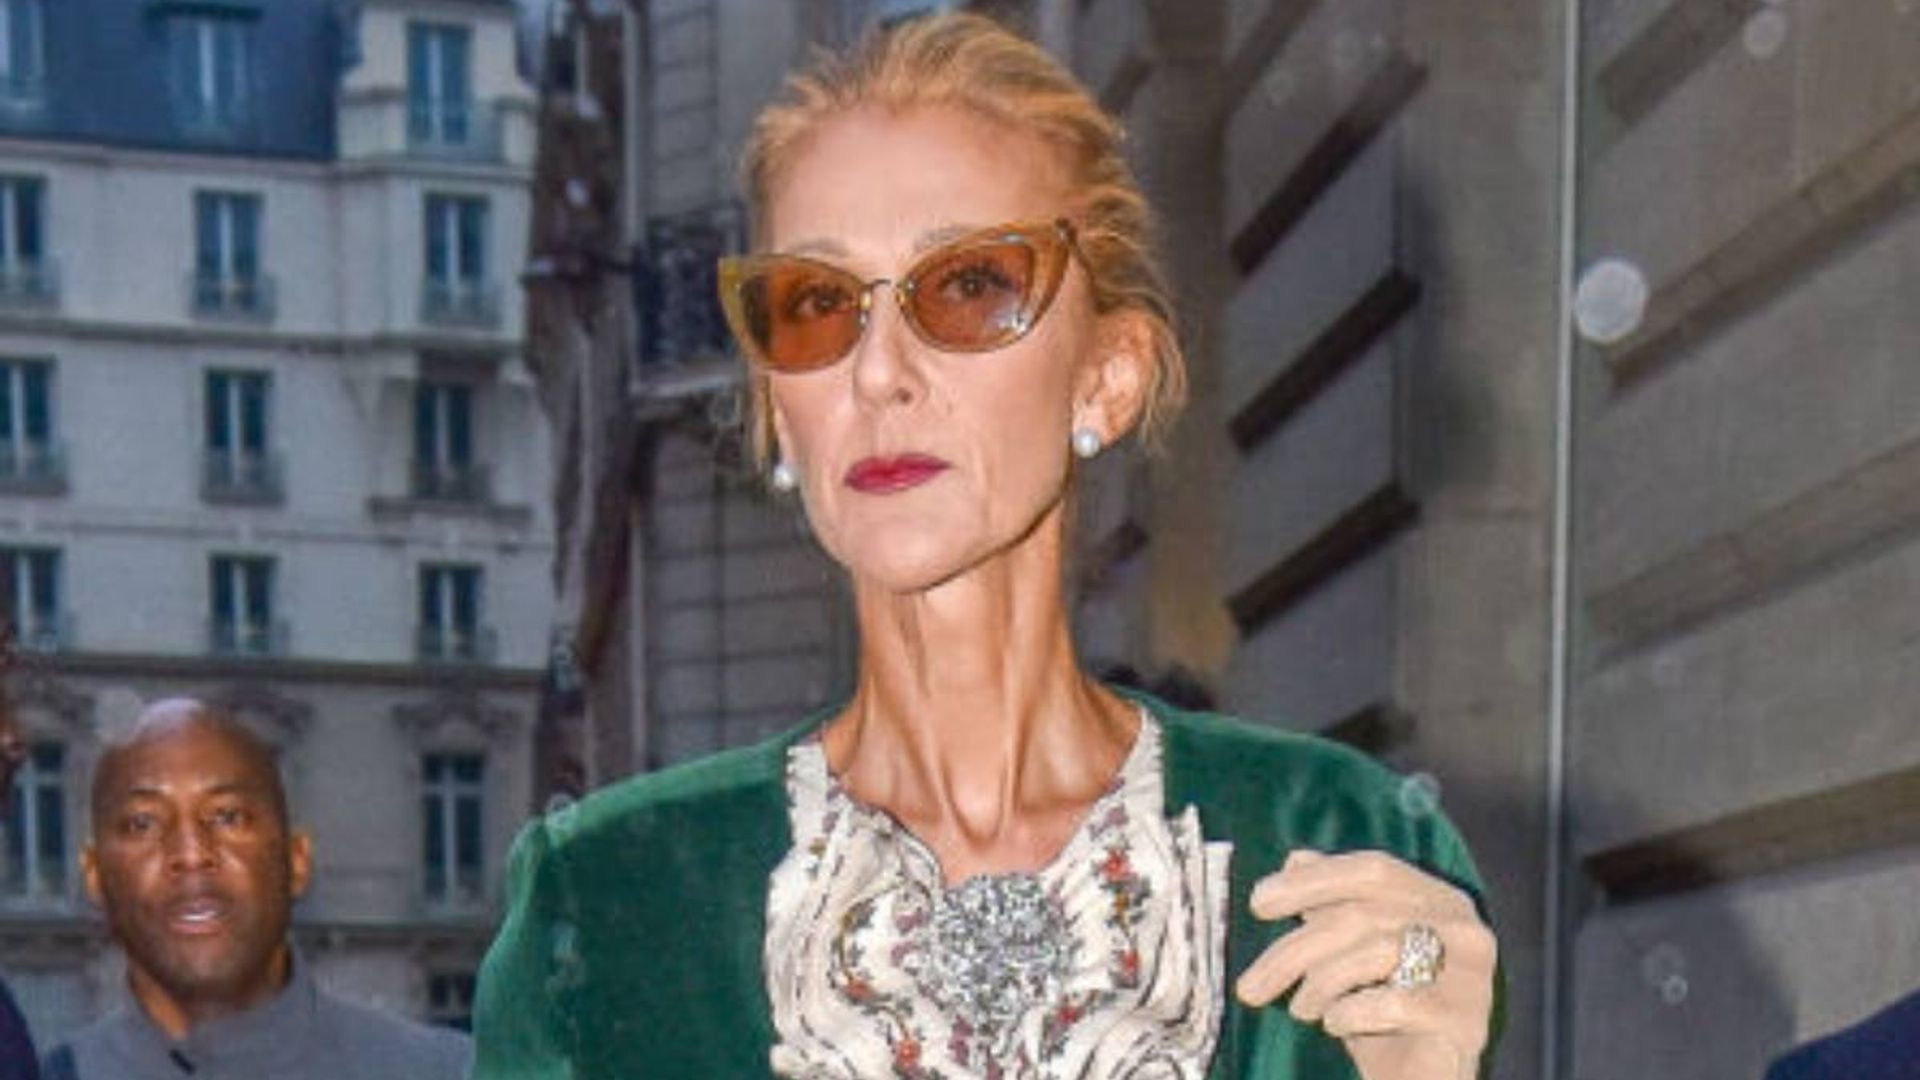 Celine Dion Just Made A Pair Of Leggings Look Super High-Fashion